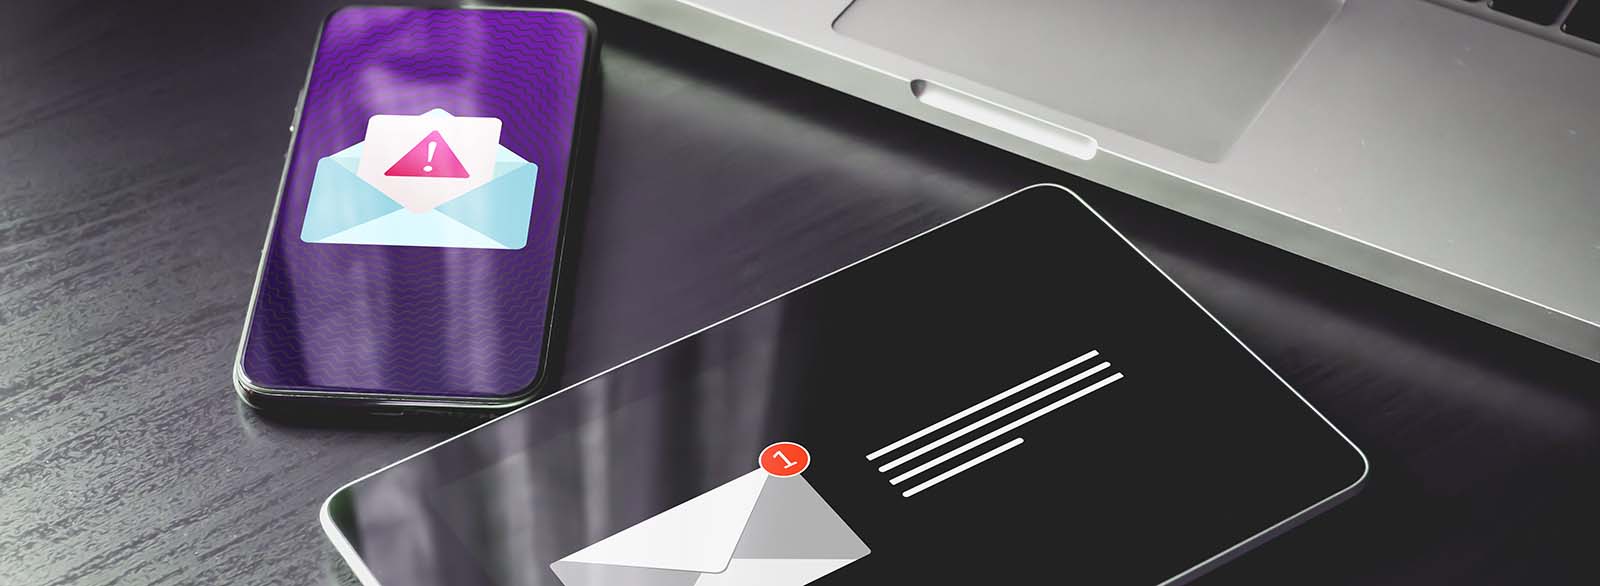 Phones with unsecured email icon